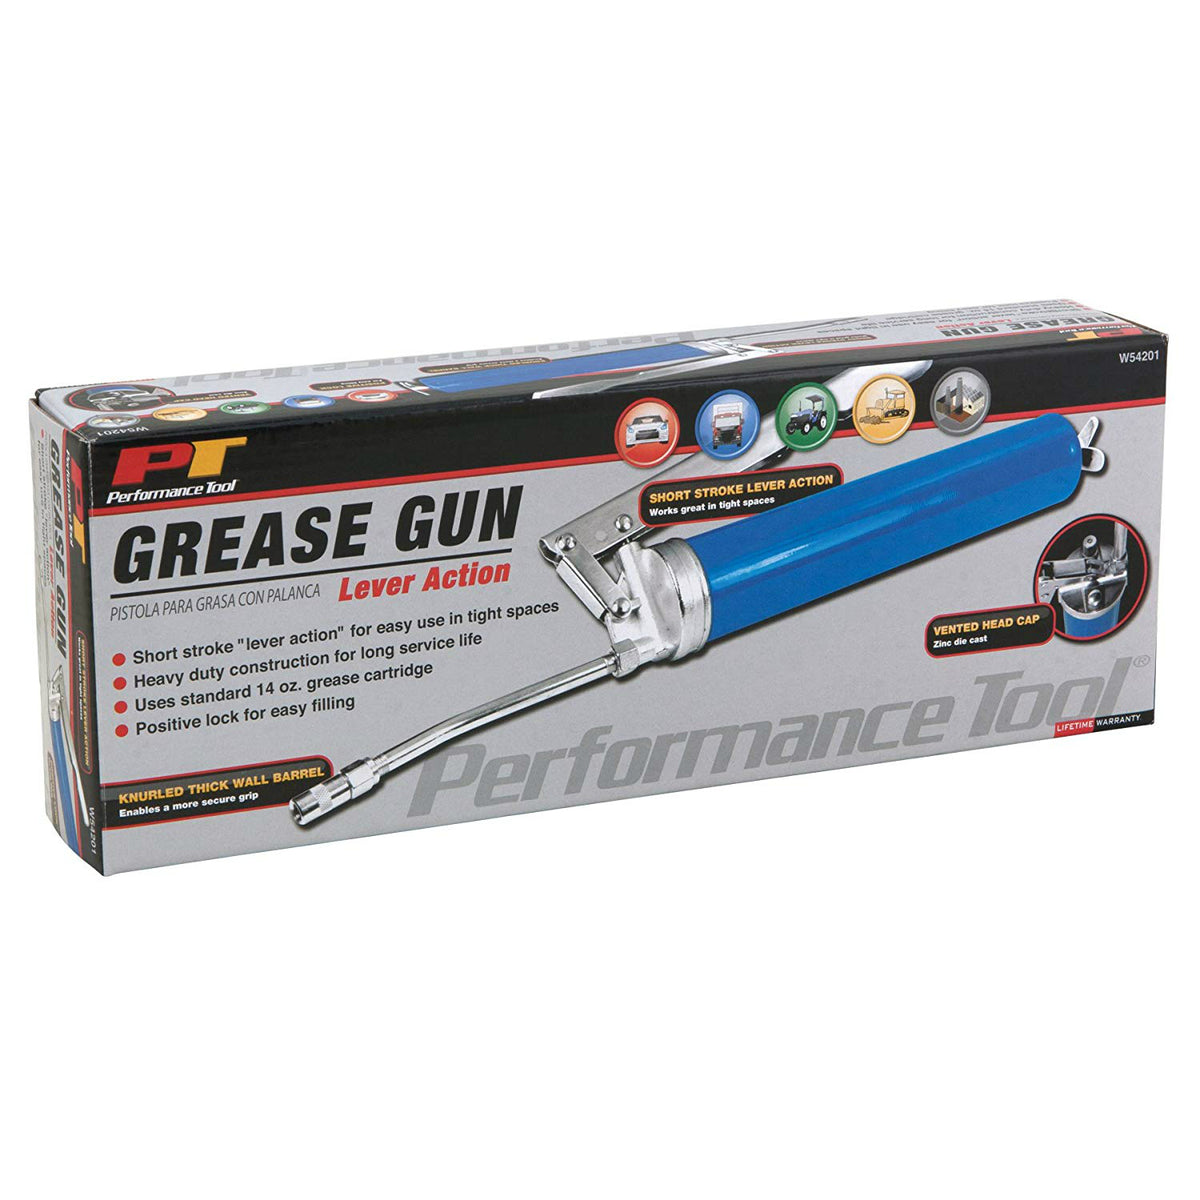 Performance Tool W54201 Lever Action Grease Gun with Positive Lock